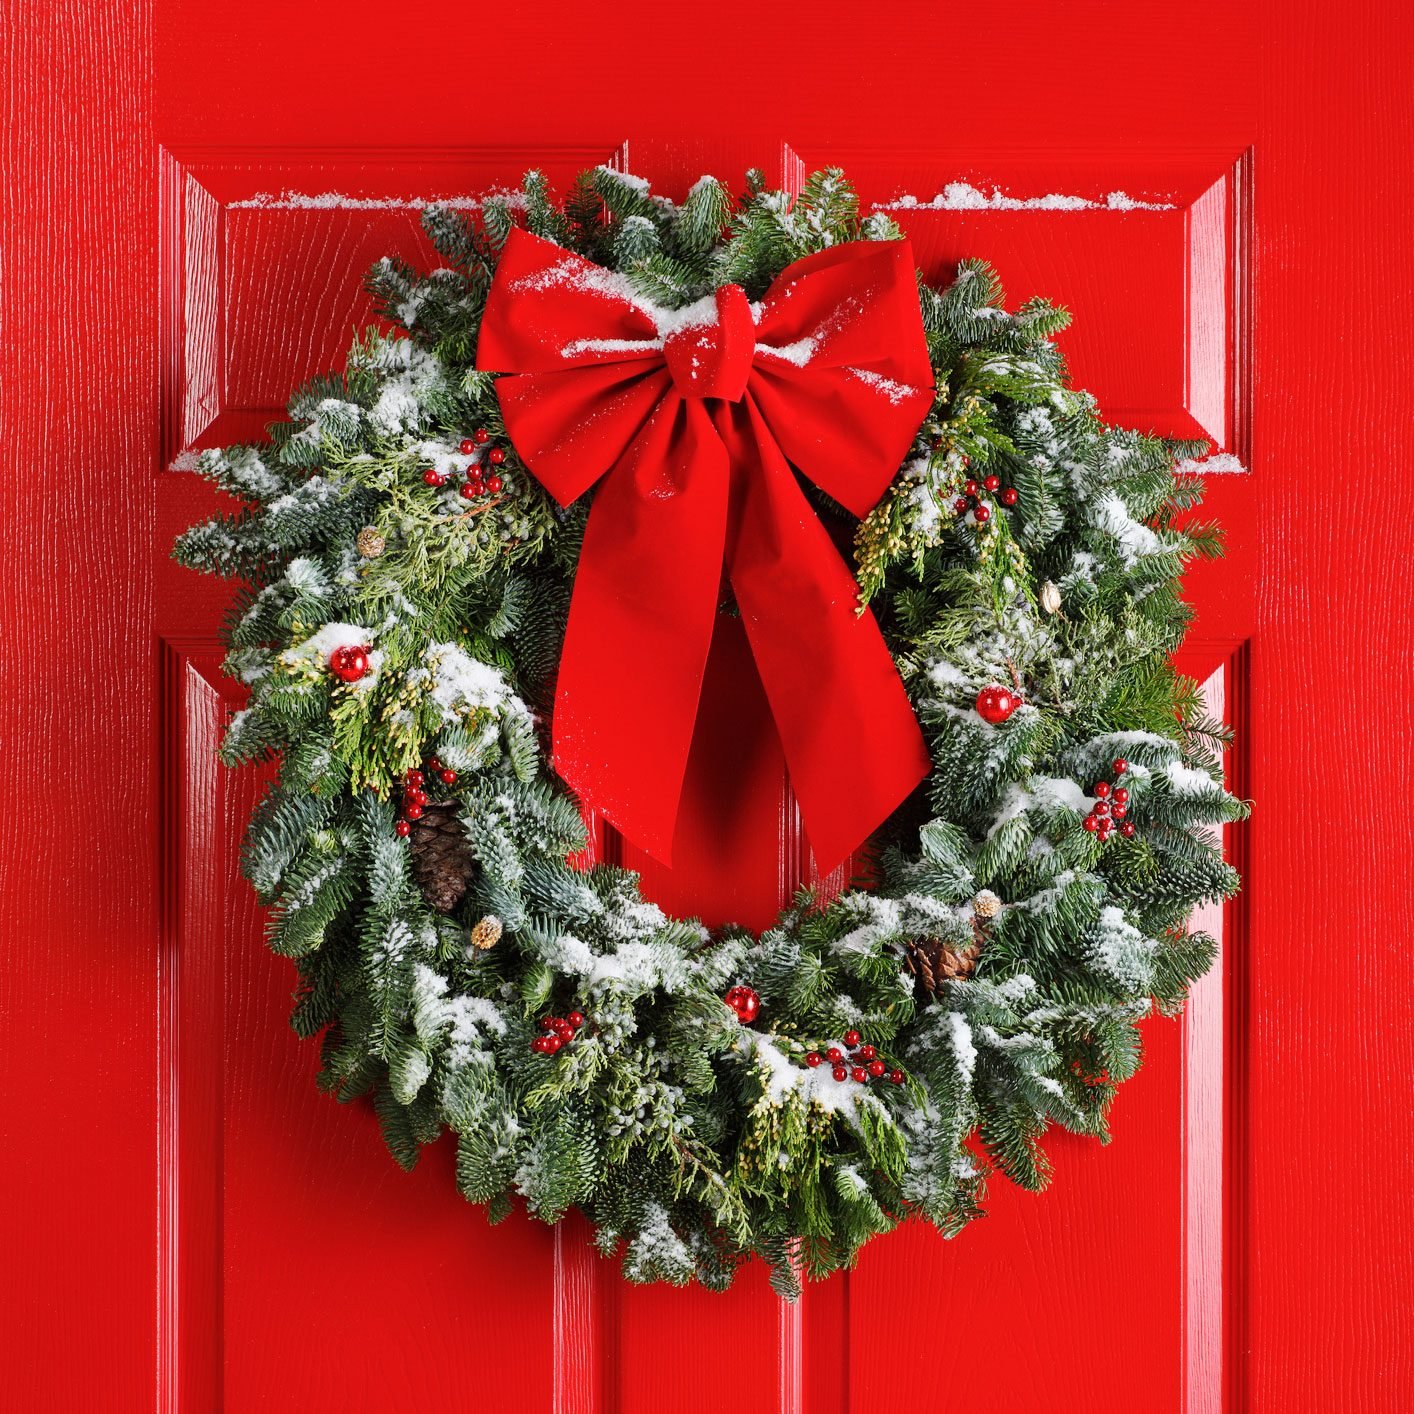 How To Snow Spray A Wreath (That Doesn't Require Flocking) - A Pretty Fix